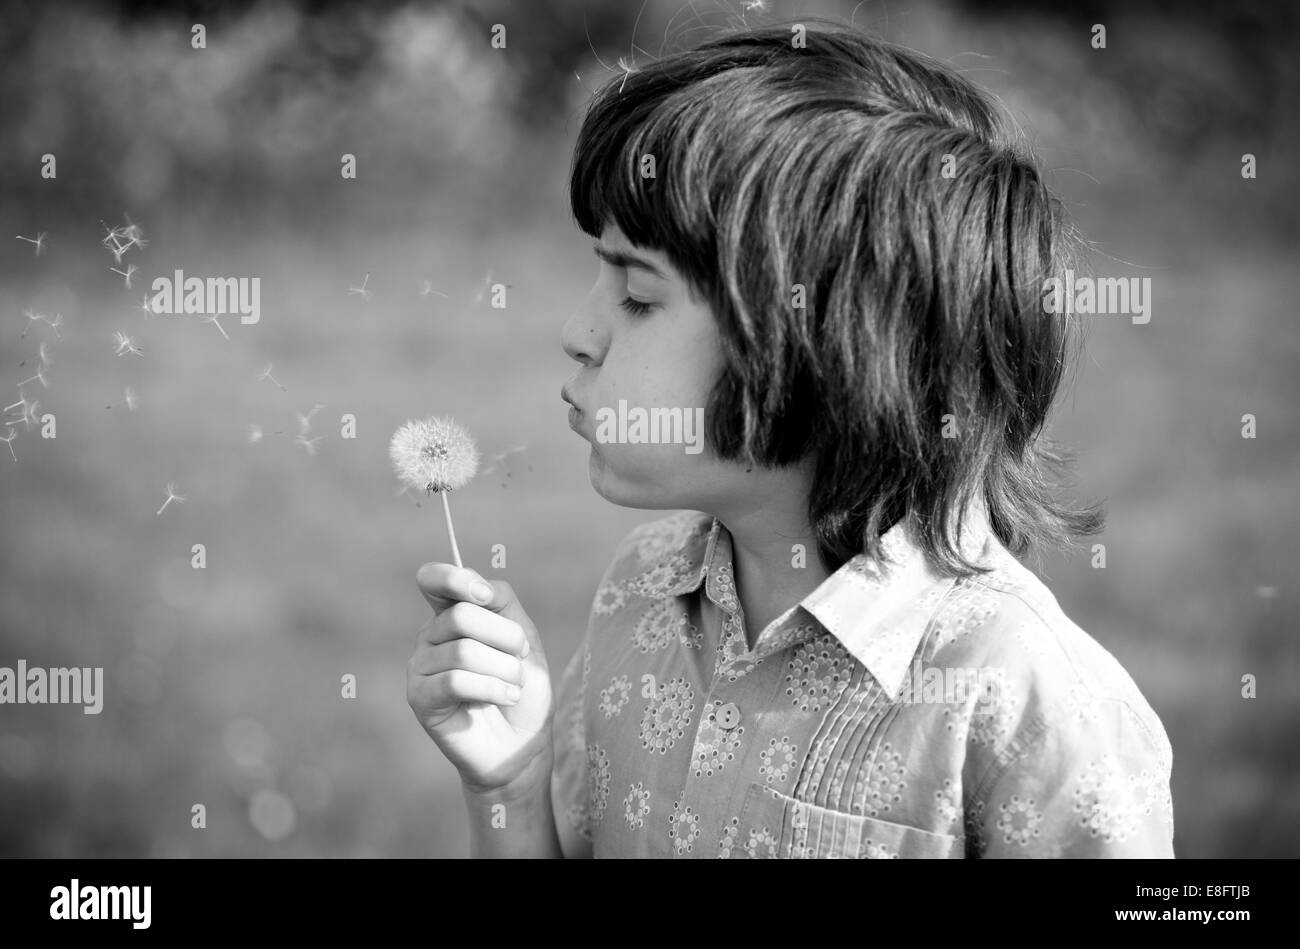 UK, England, Oxfordshire, Oxford, Young boy (10-11) blowing dandelion in field Stock Photo